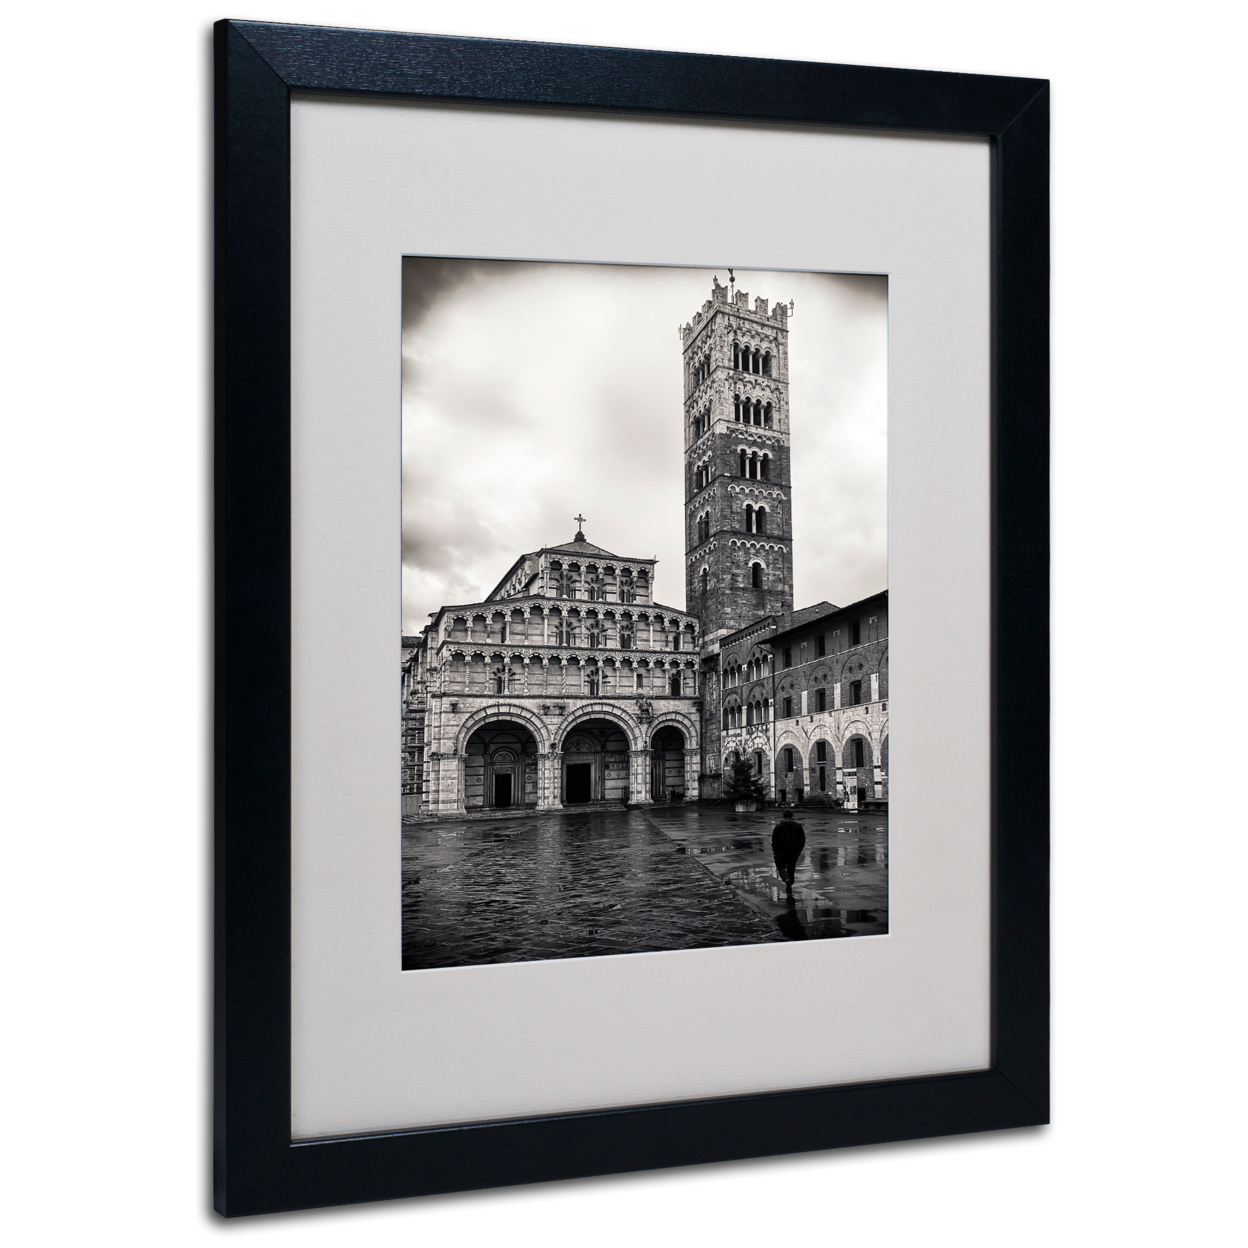 Giuseppe Torre 'Need To Pray' Black Wooden Framed Art 18 X 22 Inches